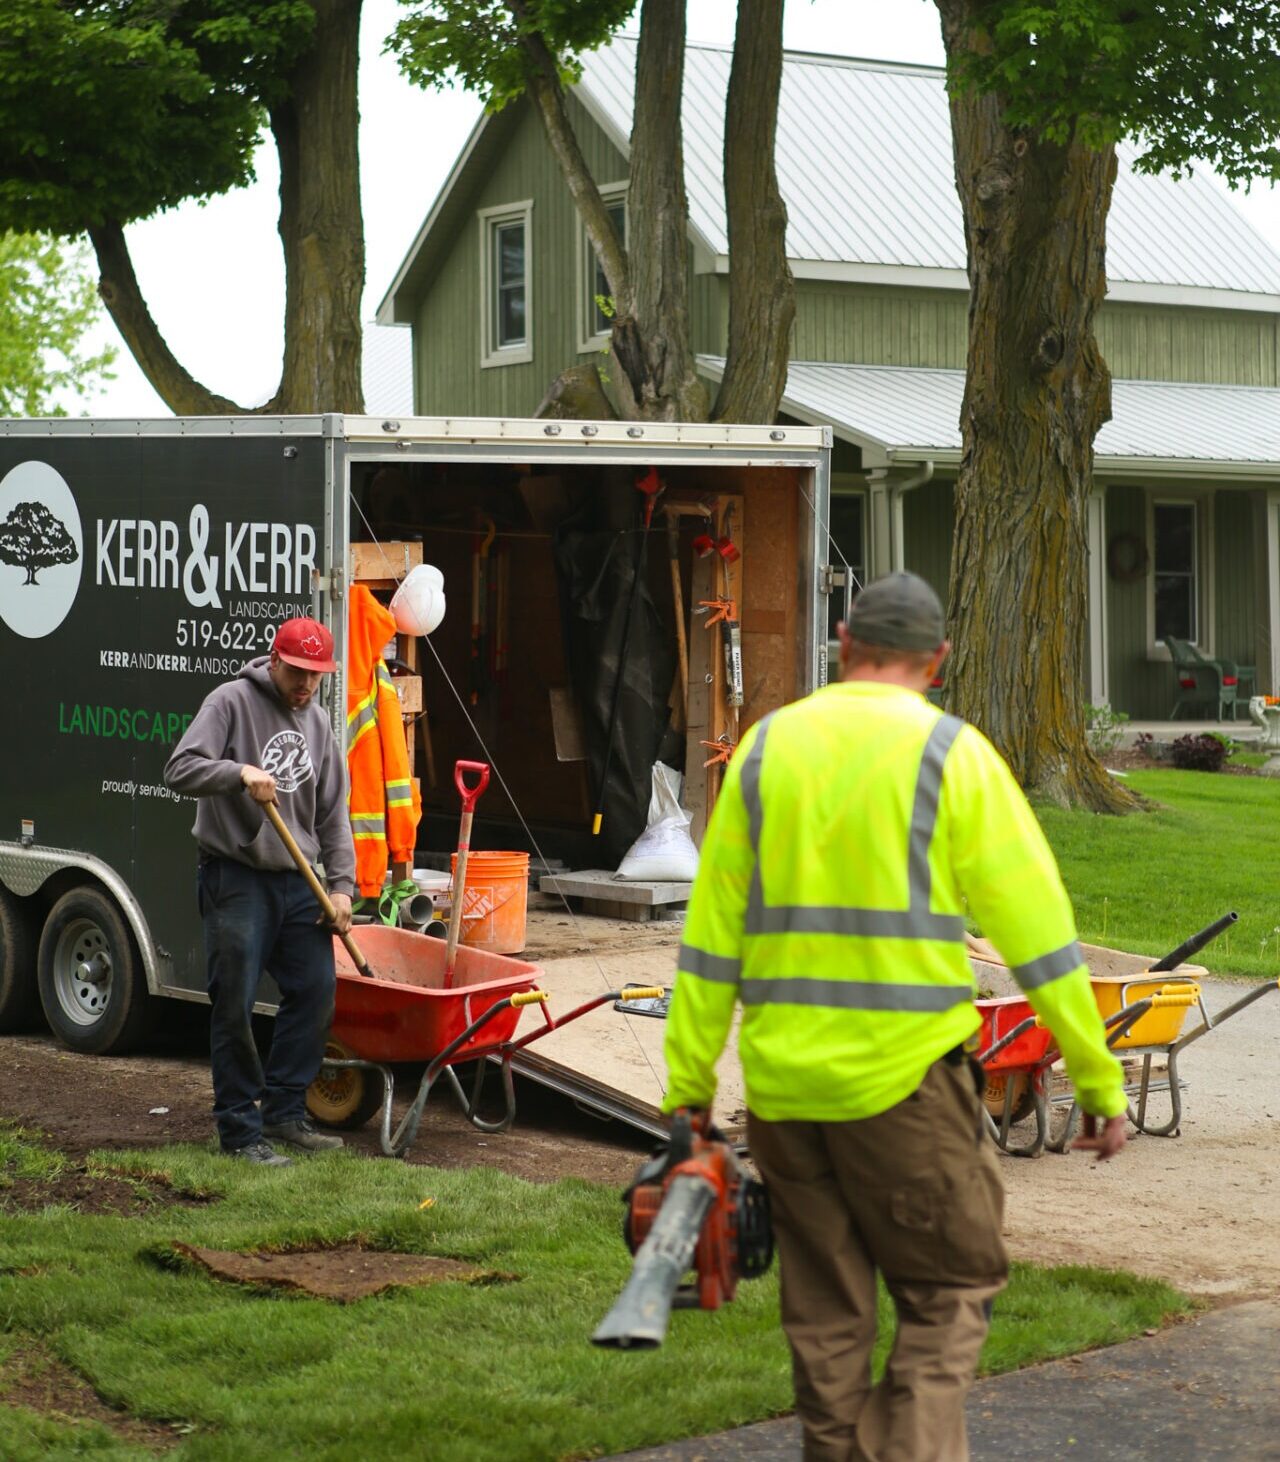 Two people in high-visibility vests are working near a landscaping trailer parked by a house amid greenery. Lawn care tools and equipment are visible.